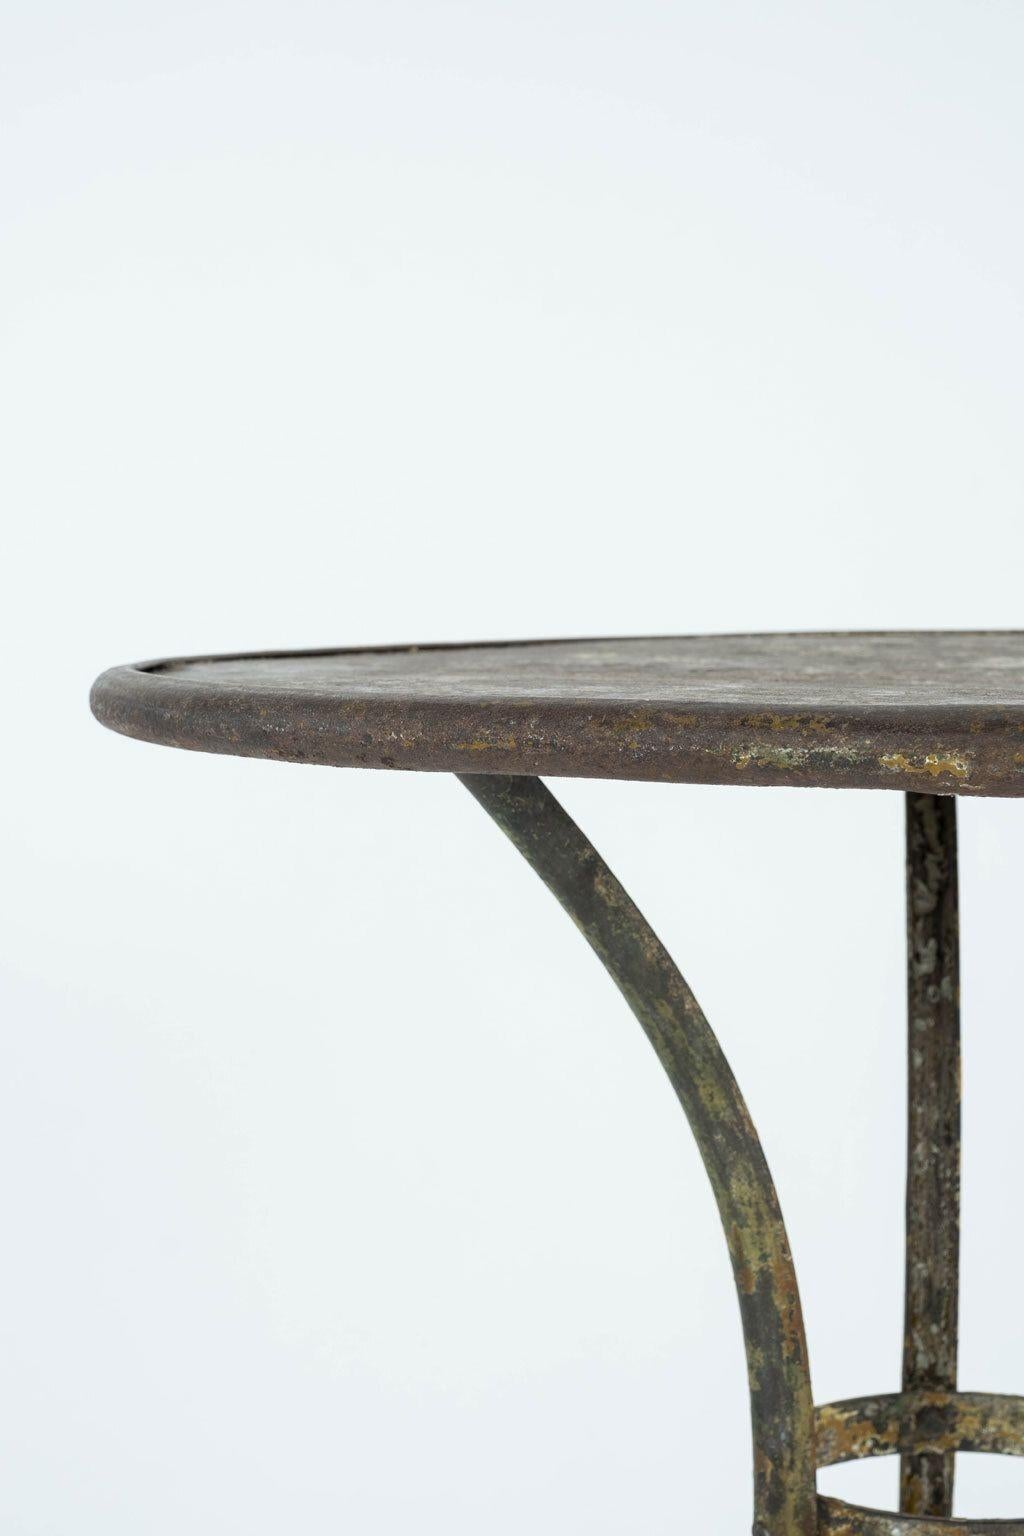 Arras iron garden table circa 1880. Remnants of early, or original, paint.

Note: Original/early finish on antique and vintage metal will include some, or all, of the following: patina, scaling, light rust, discoloration, and corrosion.